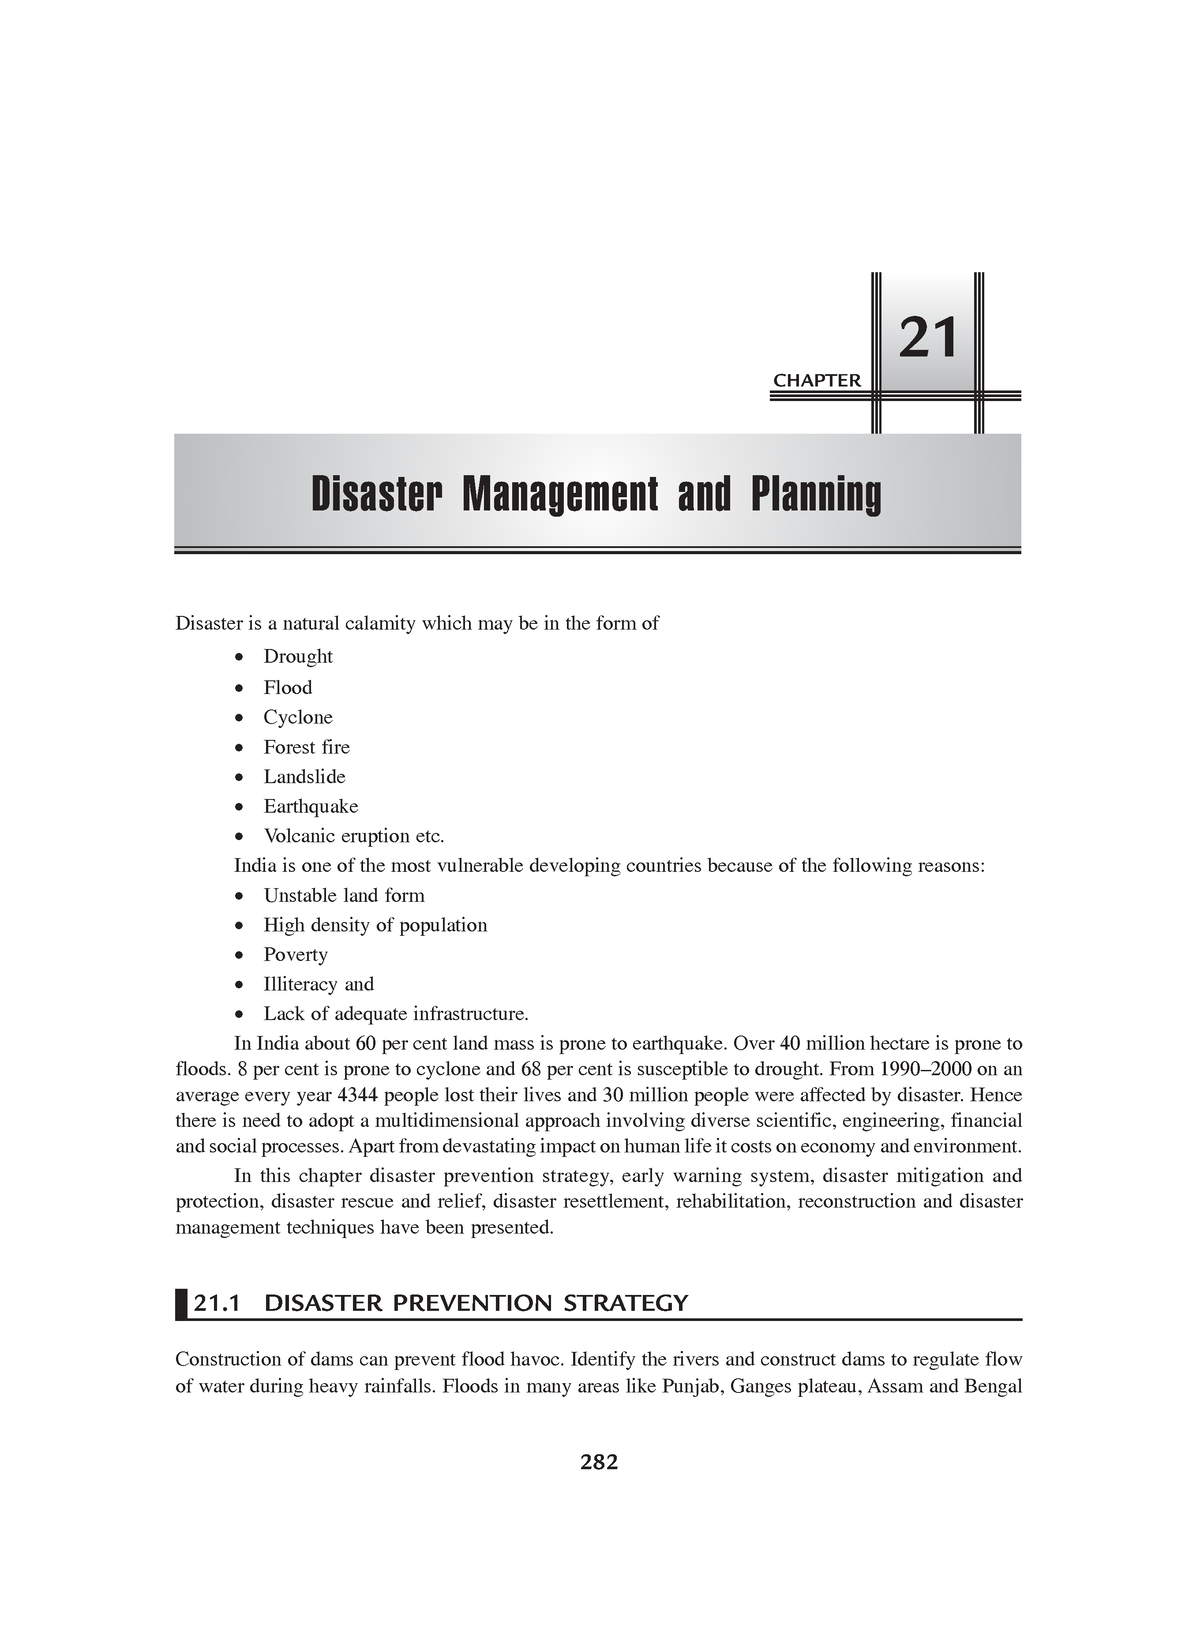 Disaster Management and Planning - CHAPTER Disaster Management and ...